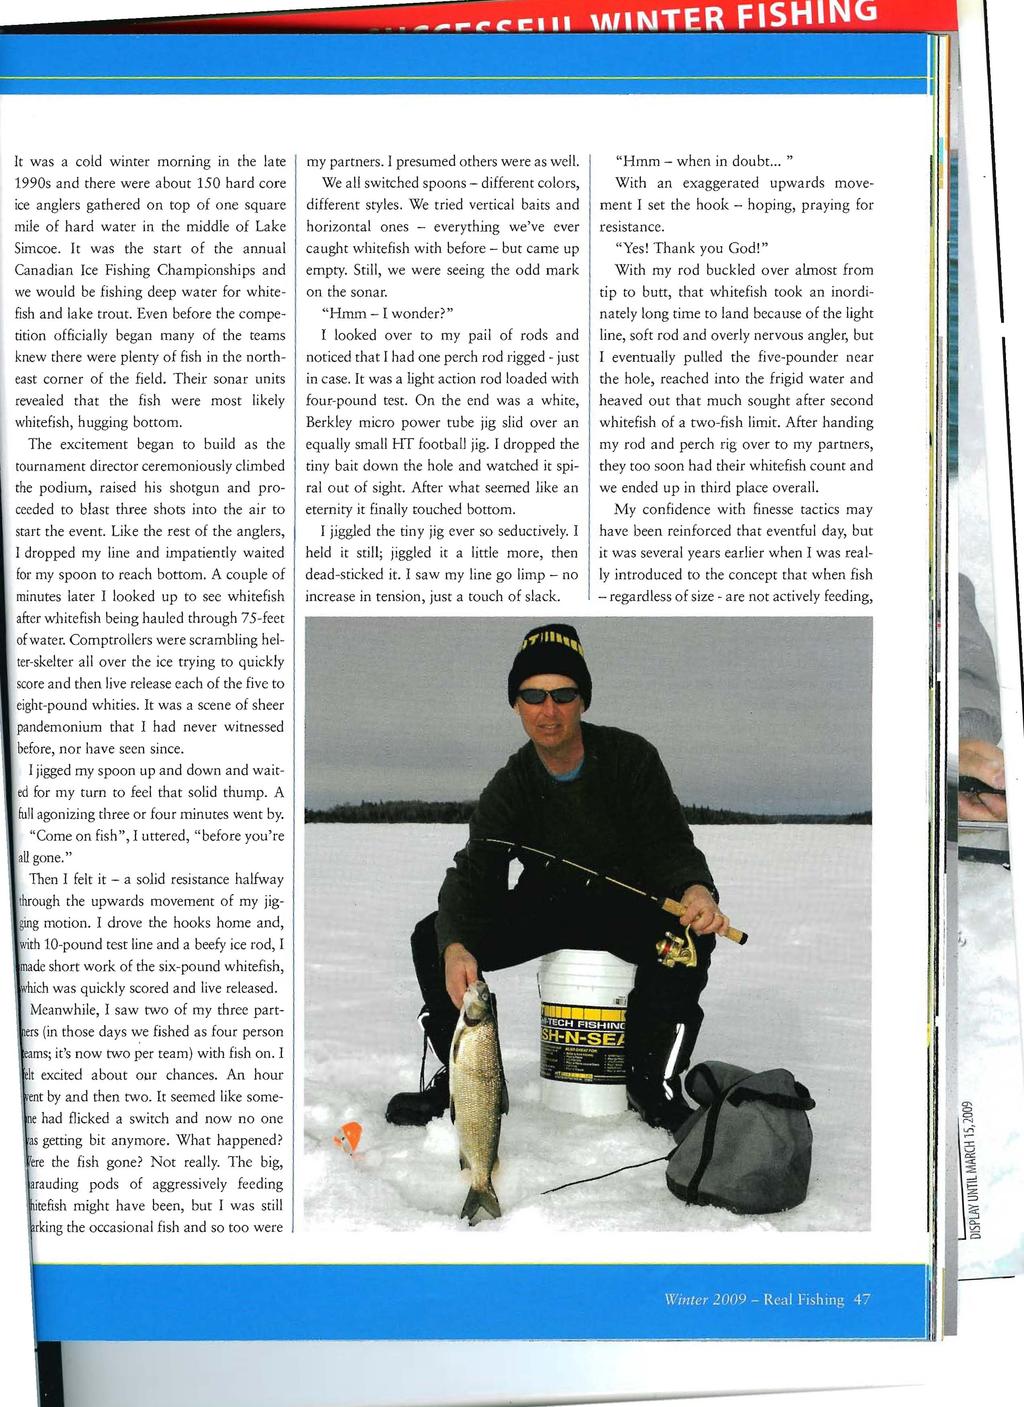 It was a cold winter morning in the late 1990s and there were about 150 hard core ice anglers gathered on top of one square mile of hard water in the middle of Lake Simcoe.